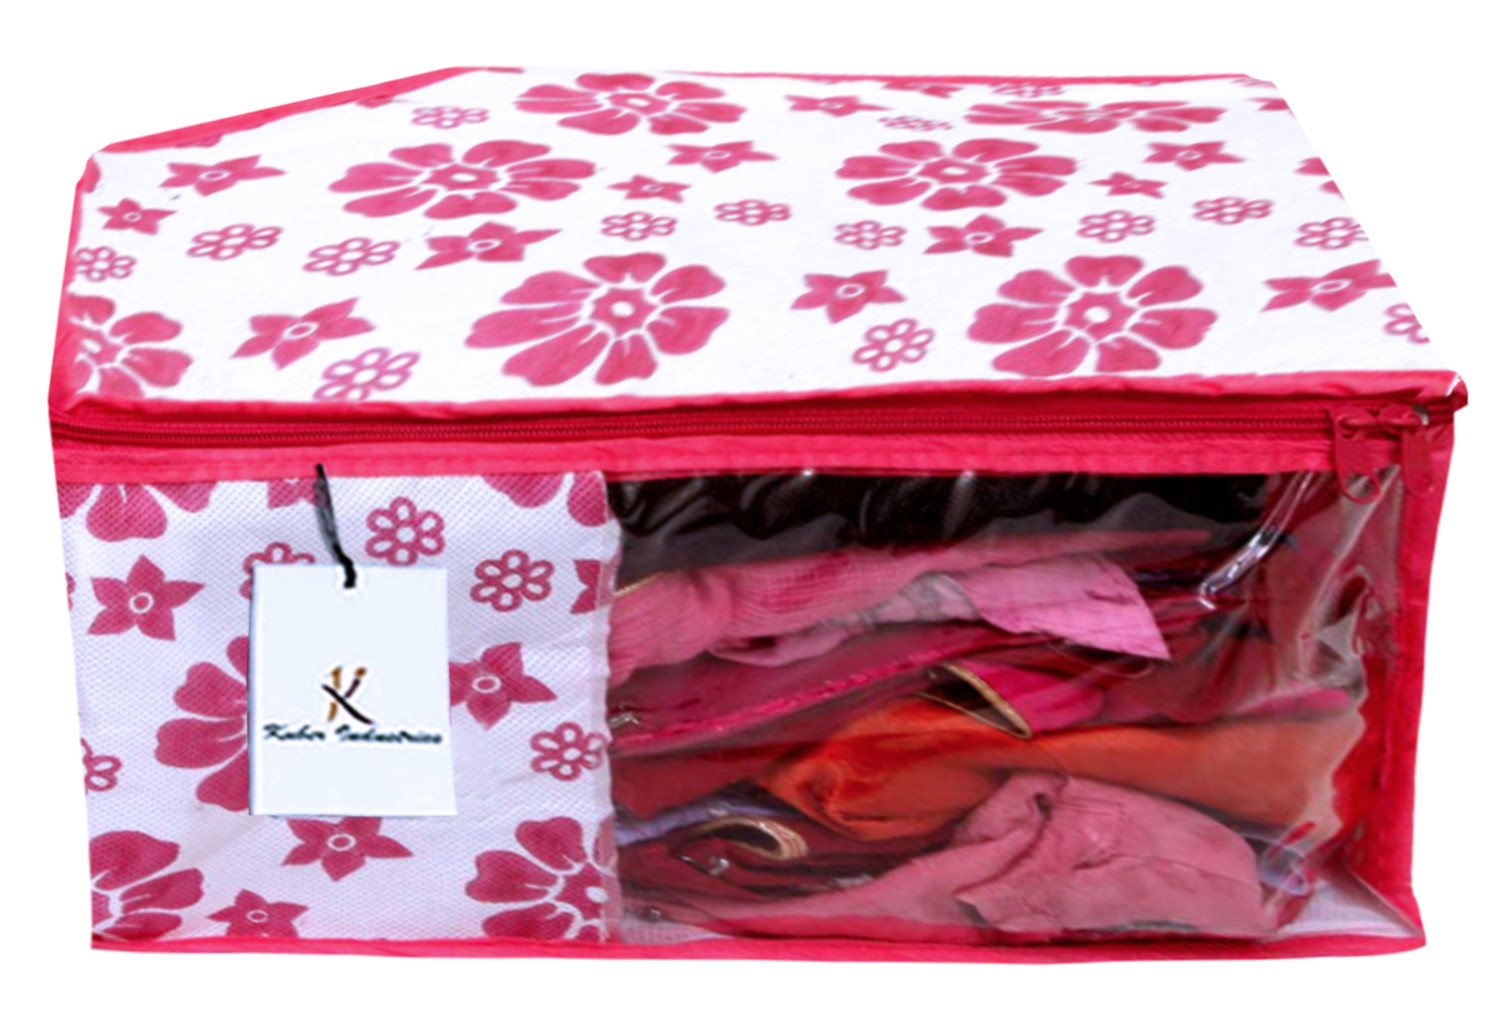 Kuber Industries Flower Design Non Woven Saree Cover/Cloth Wardrobe Organizer And Blouse Cover Combo Set (Pink) -CTKTC38439